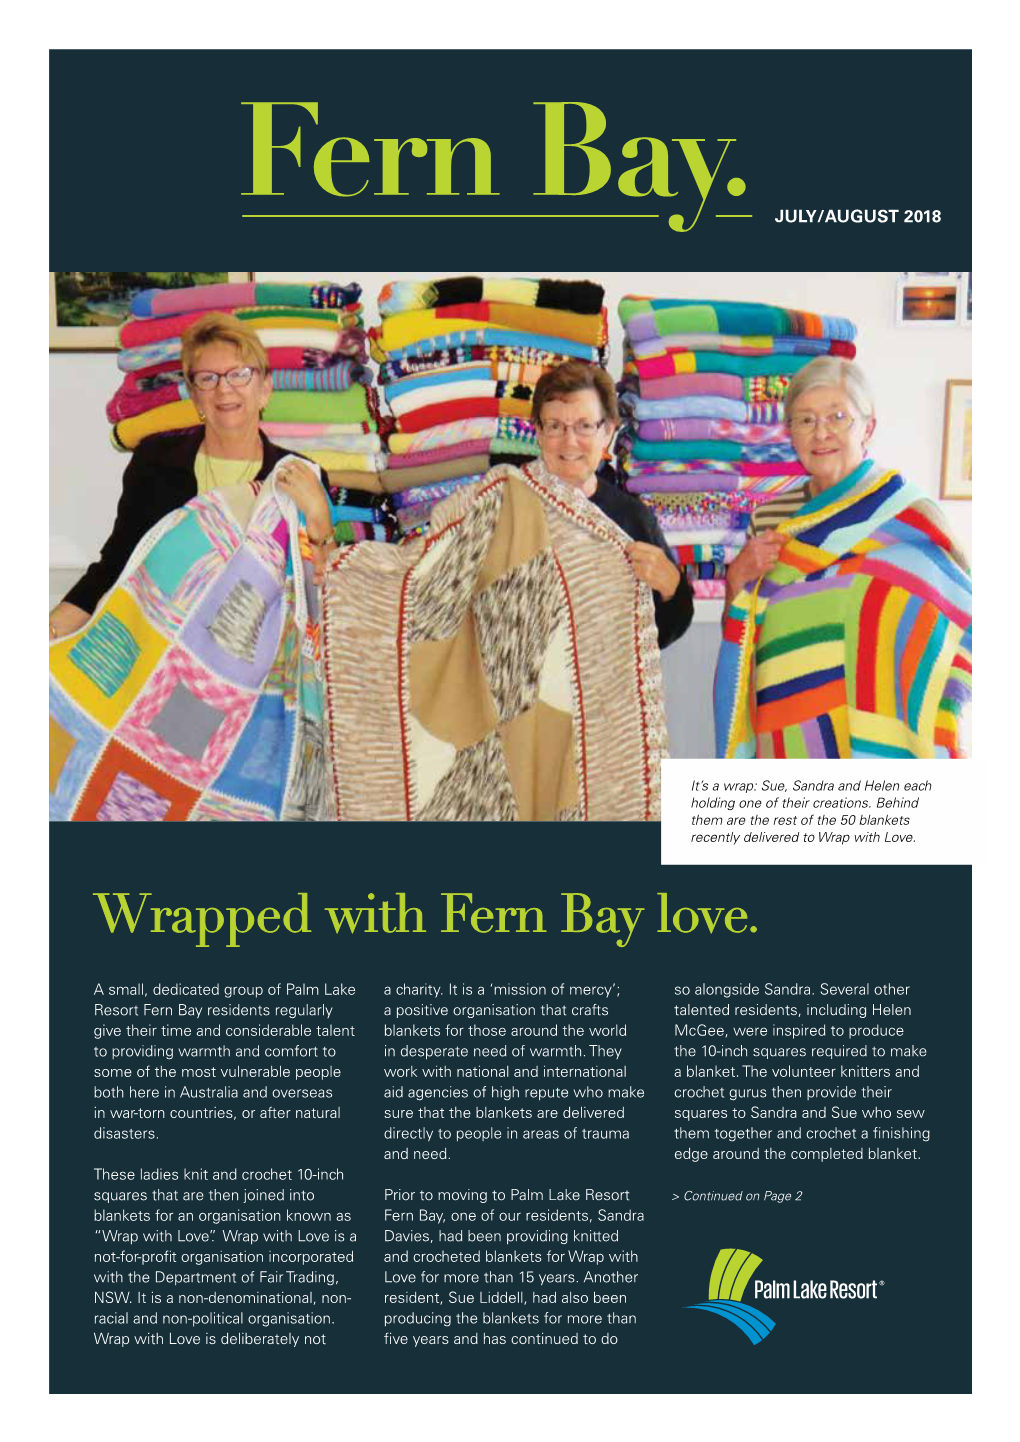 Wrapped with Fern Bay Love